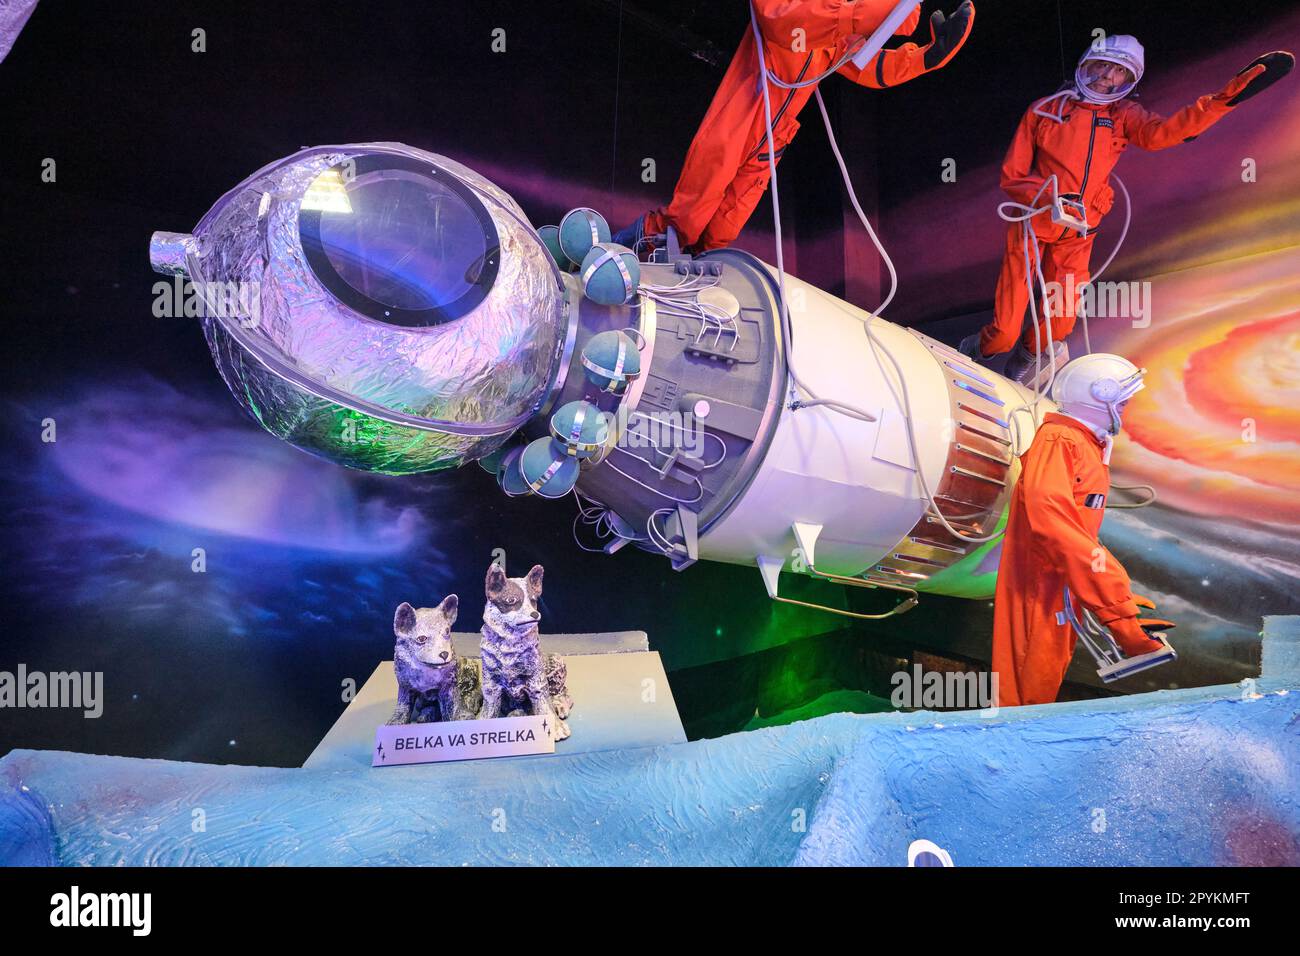 Three Russian cosmonauts in orange suits and the space dogs Belka and Strelka. In a diorama depicting the Soviet era space program at the Toshkent Pla Stock Photo